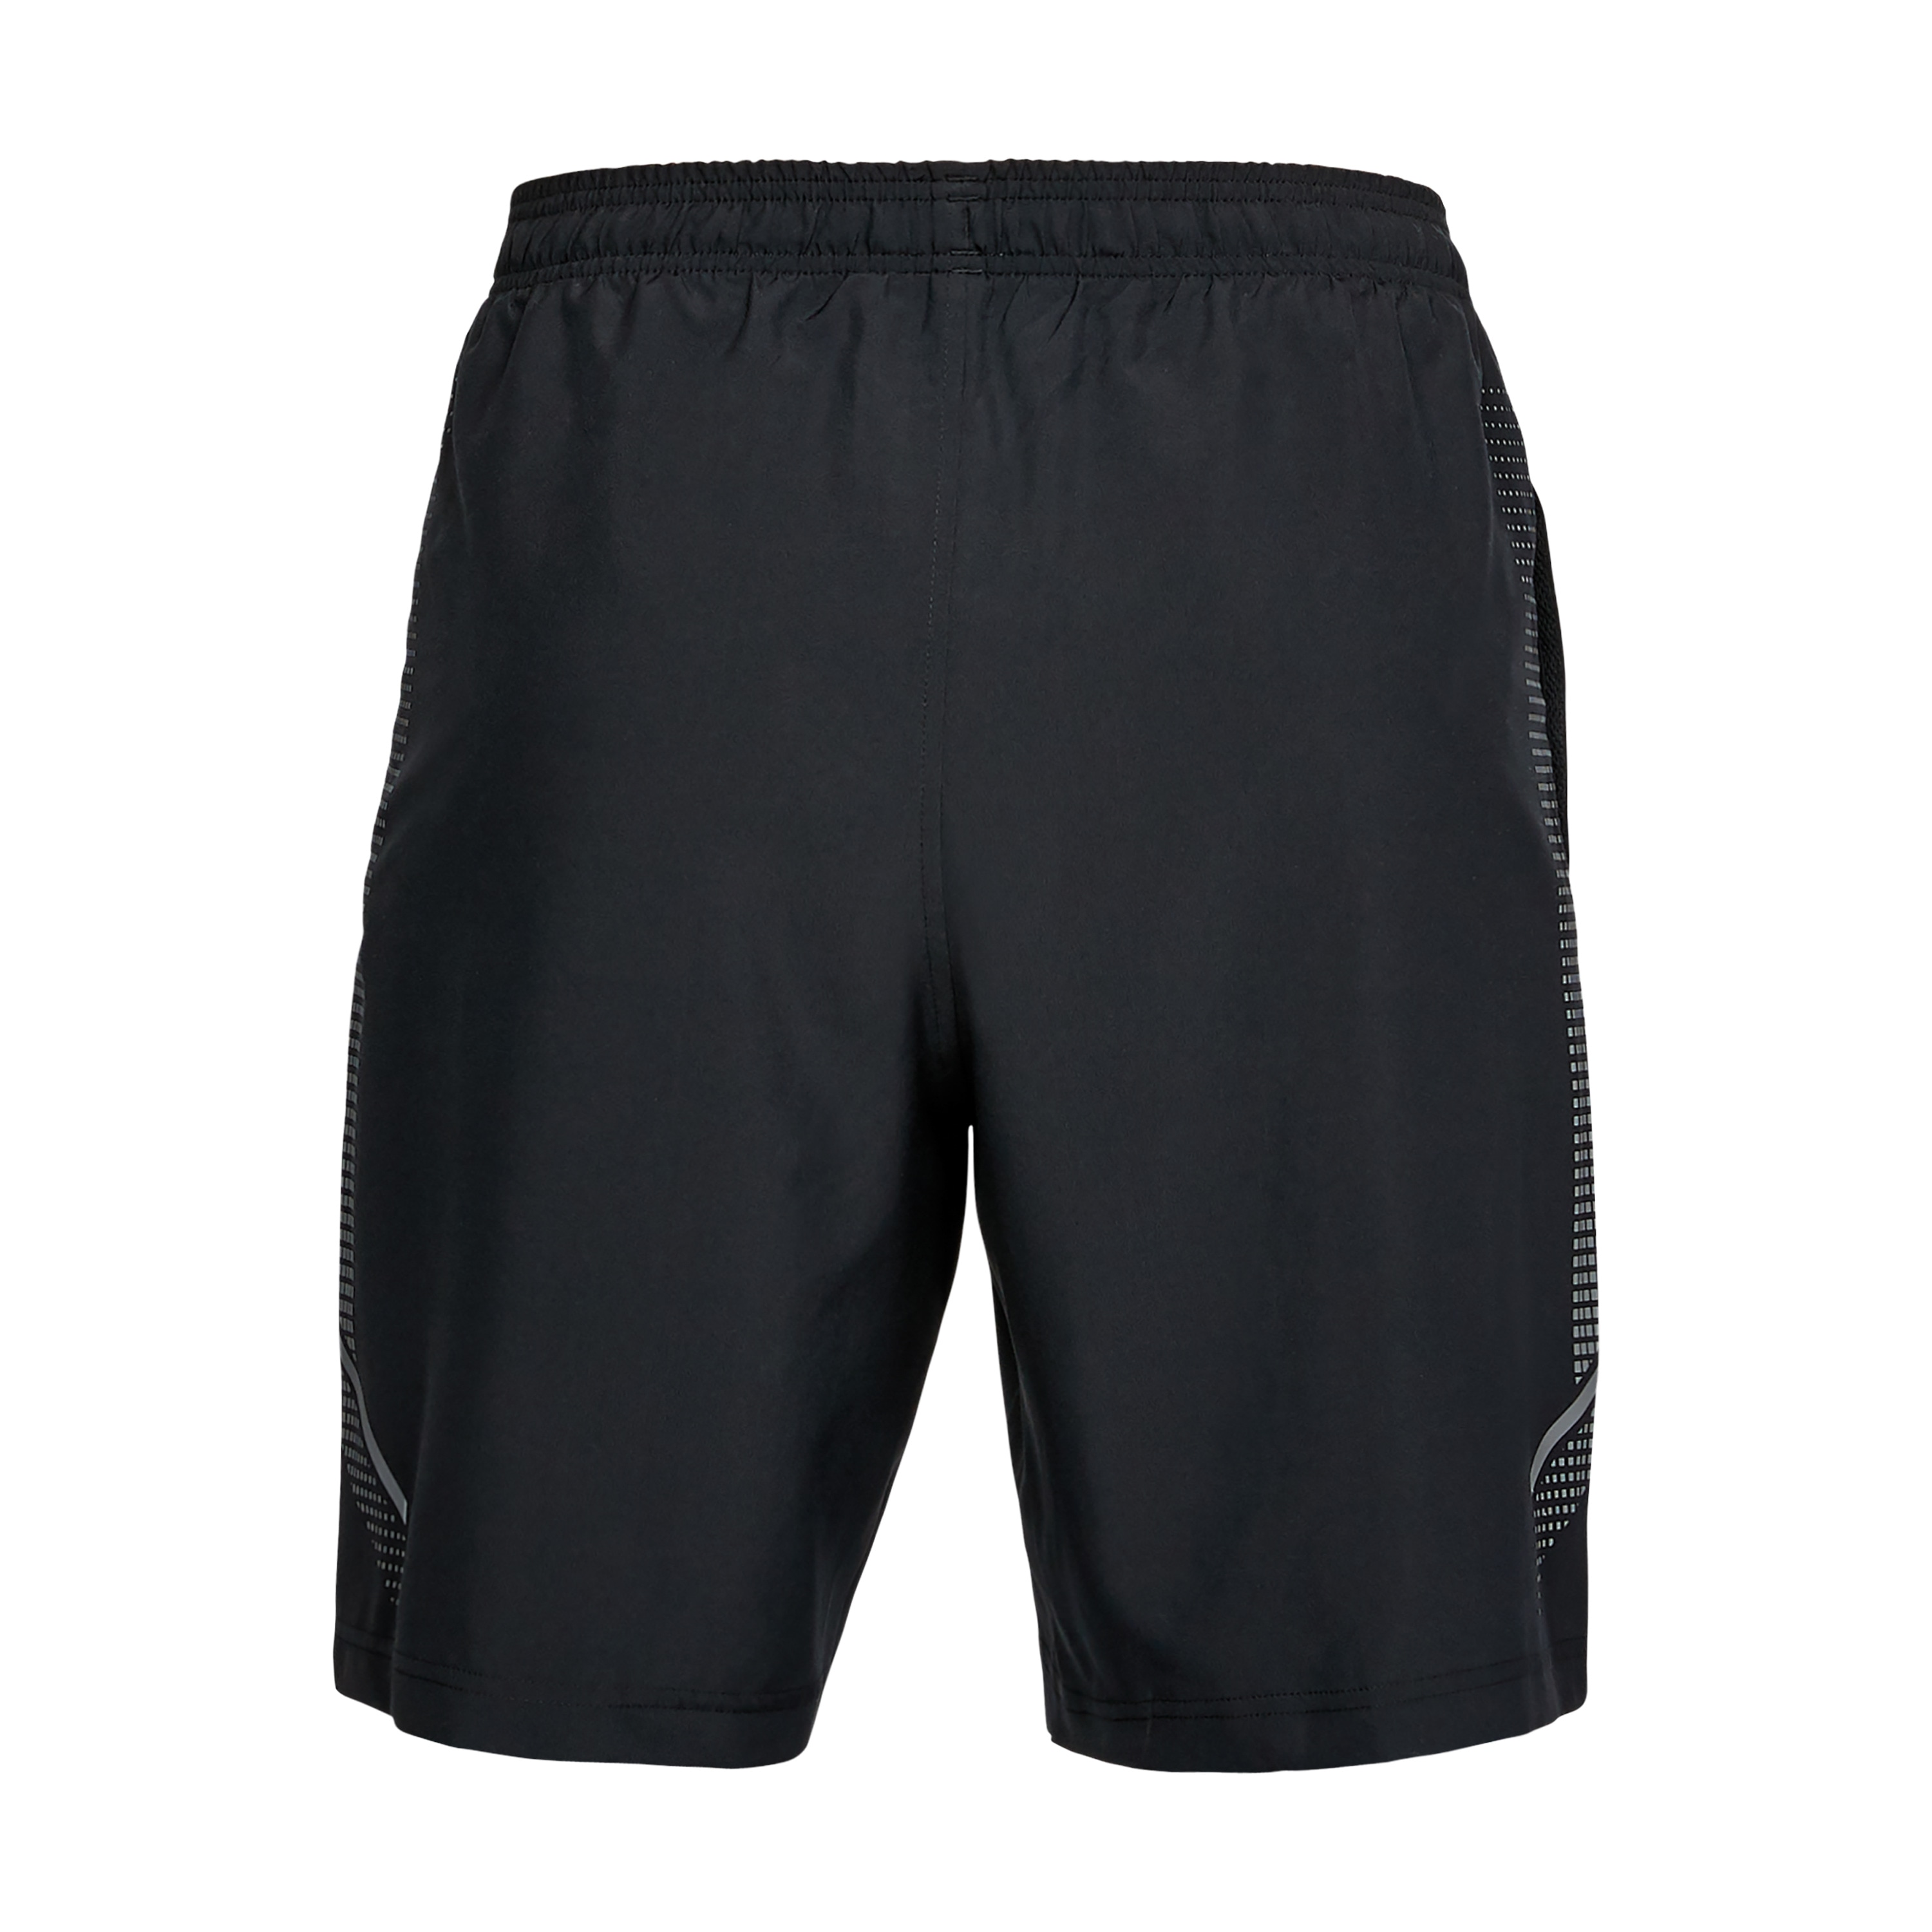 Under Armour Shorts Woven Graphic II black